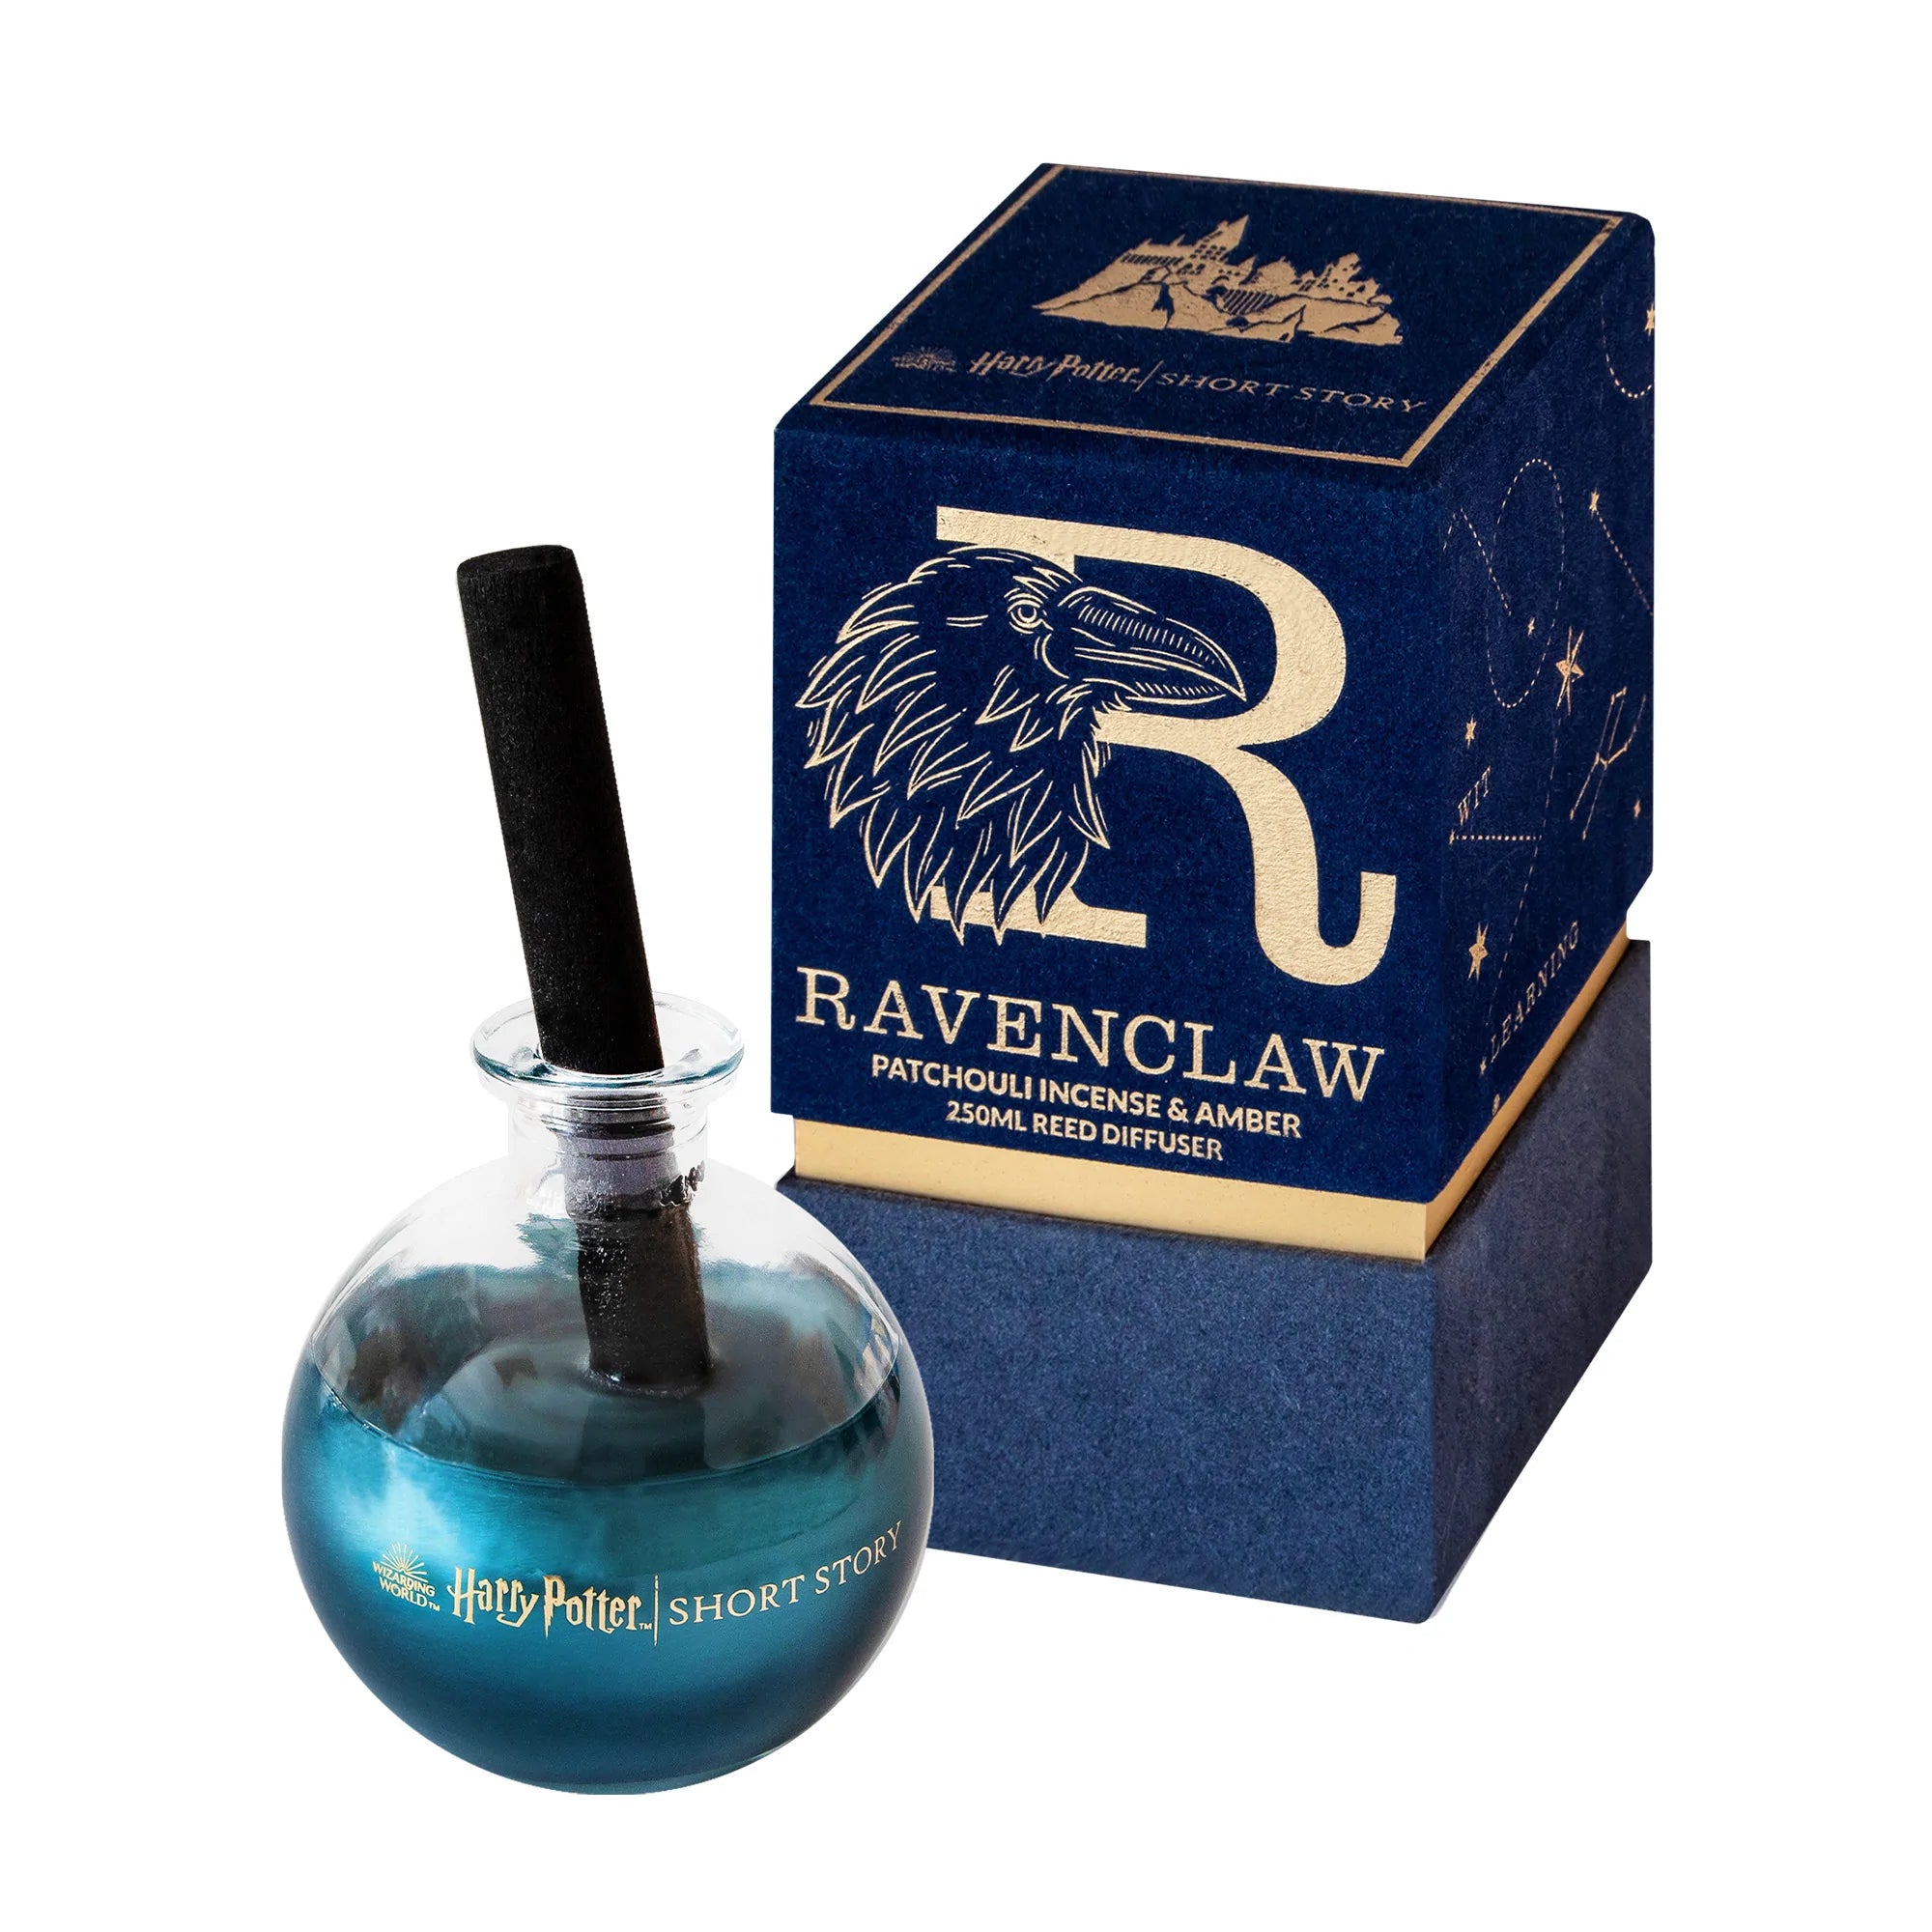 Harry Potter Diffuser - Ravenclaw (Patchouli Incense & Amber)